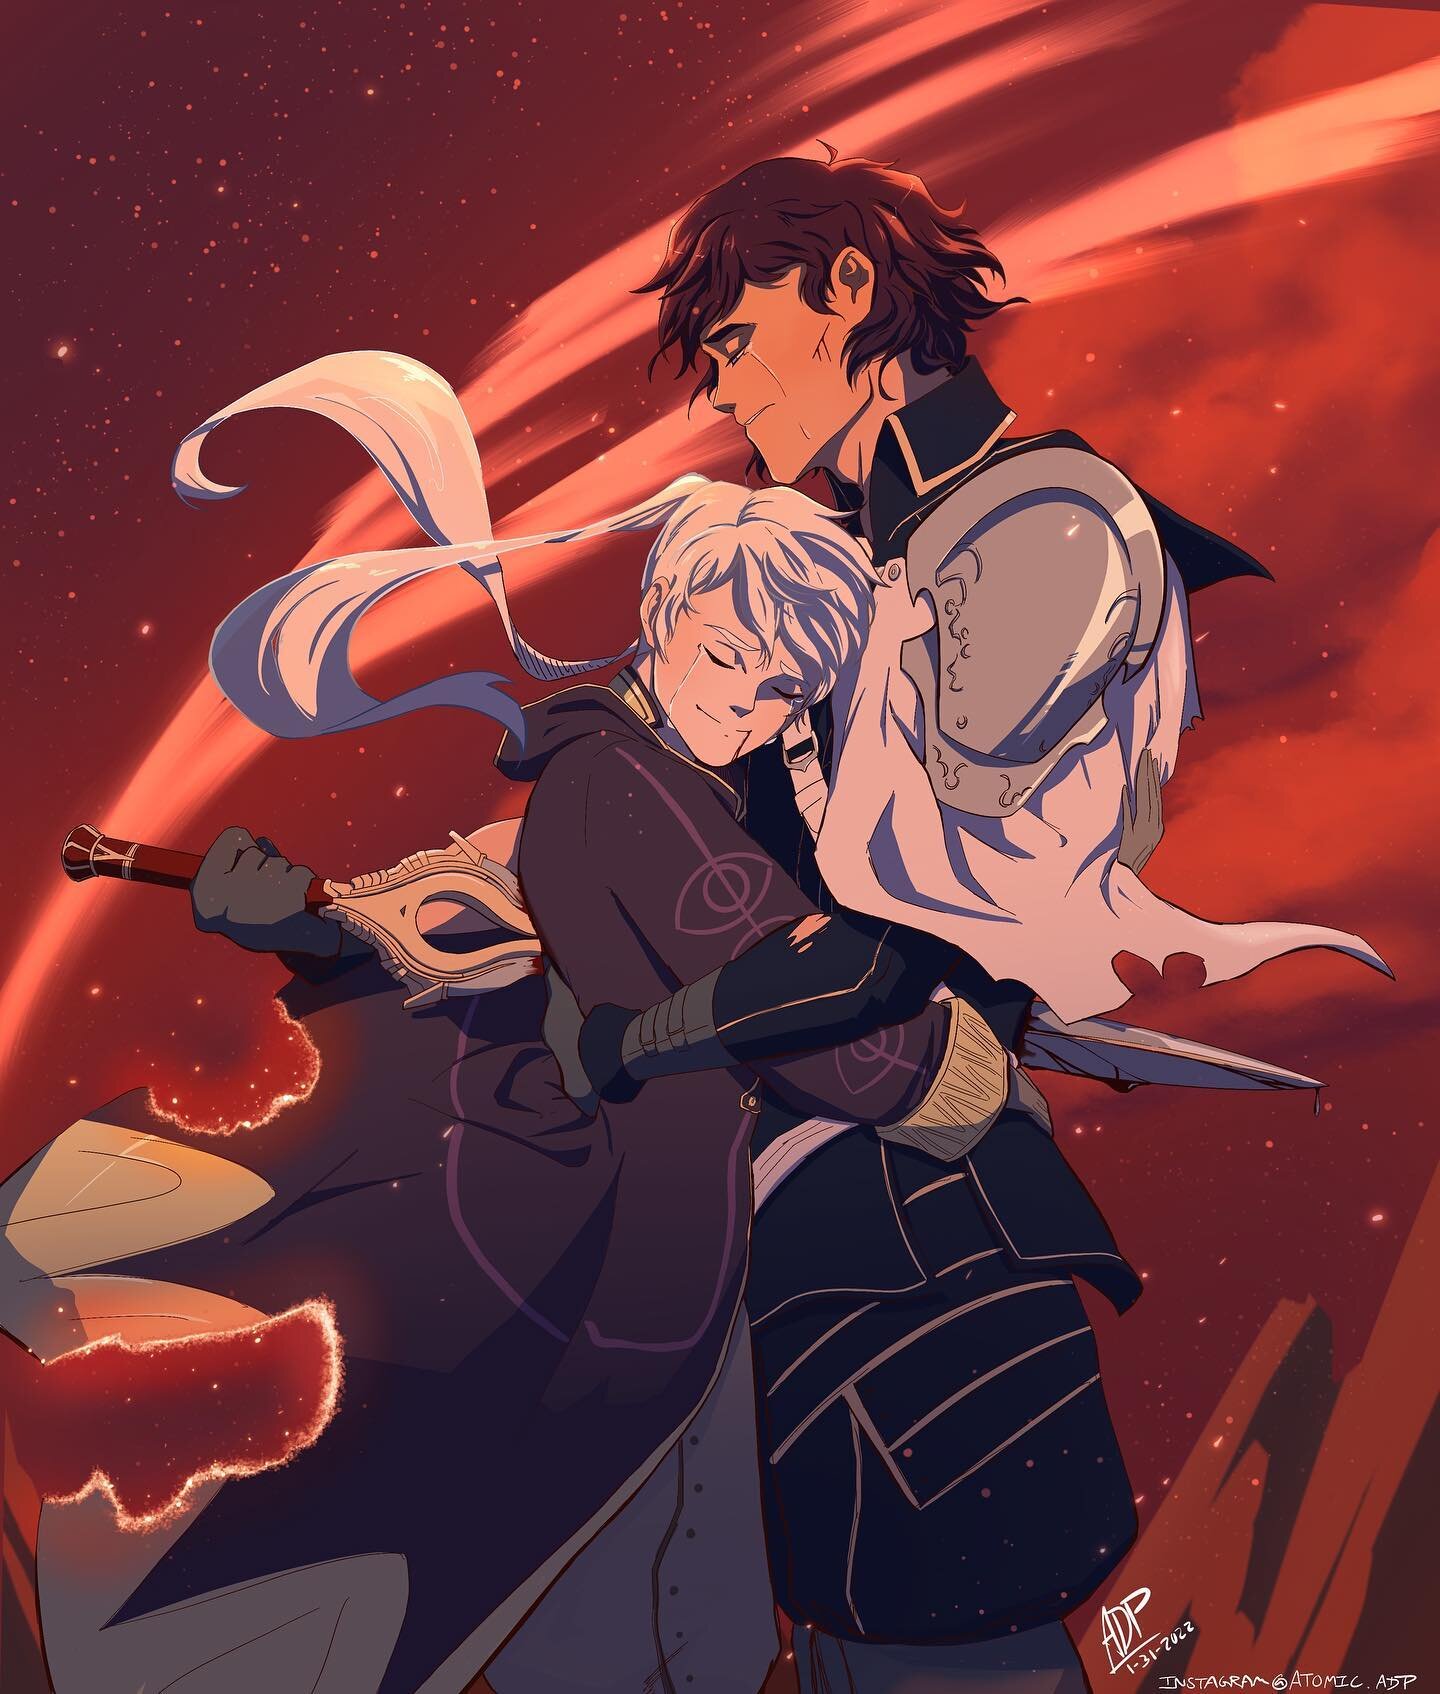 My DM played the battle music from Awakening during a session one (1) time and all my angsty high school chrobin brainrot came barreling back

2021 is all about figuring out subtle backgrounds (while using the same damn center composition but we won&